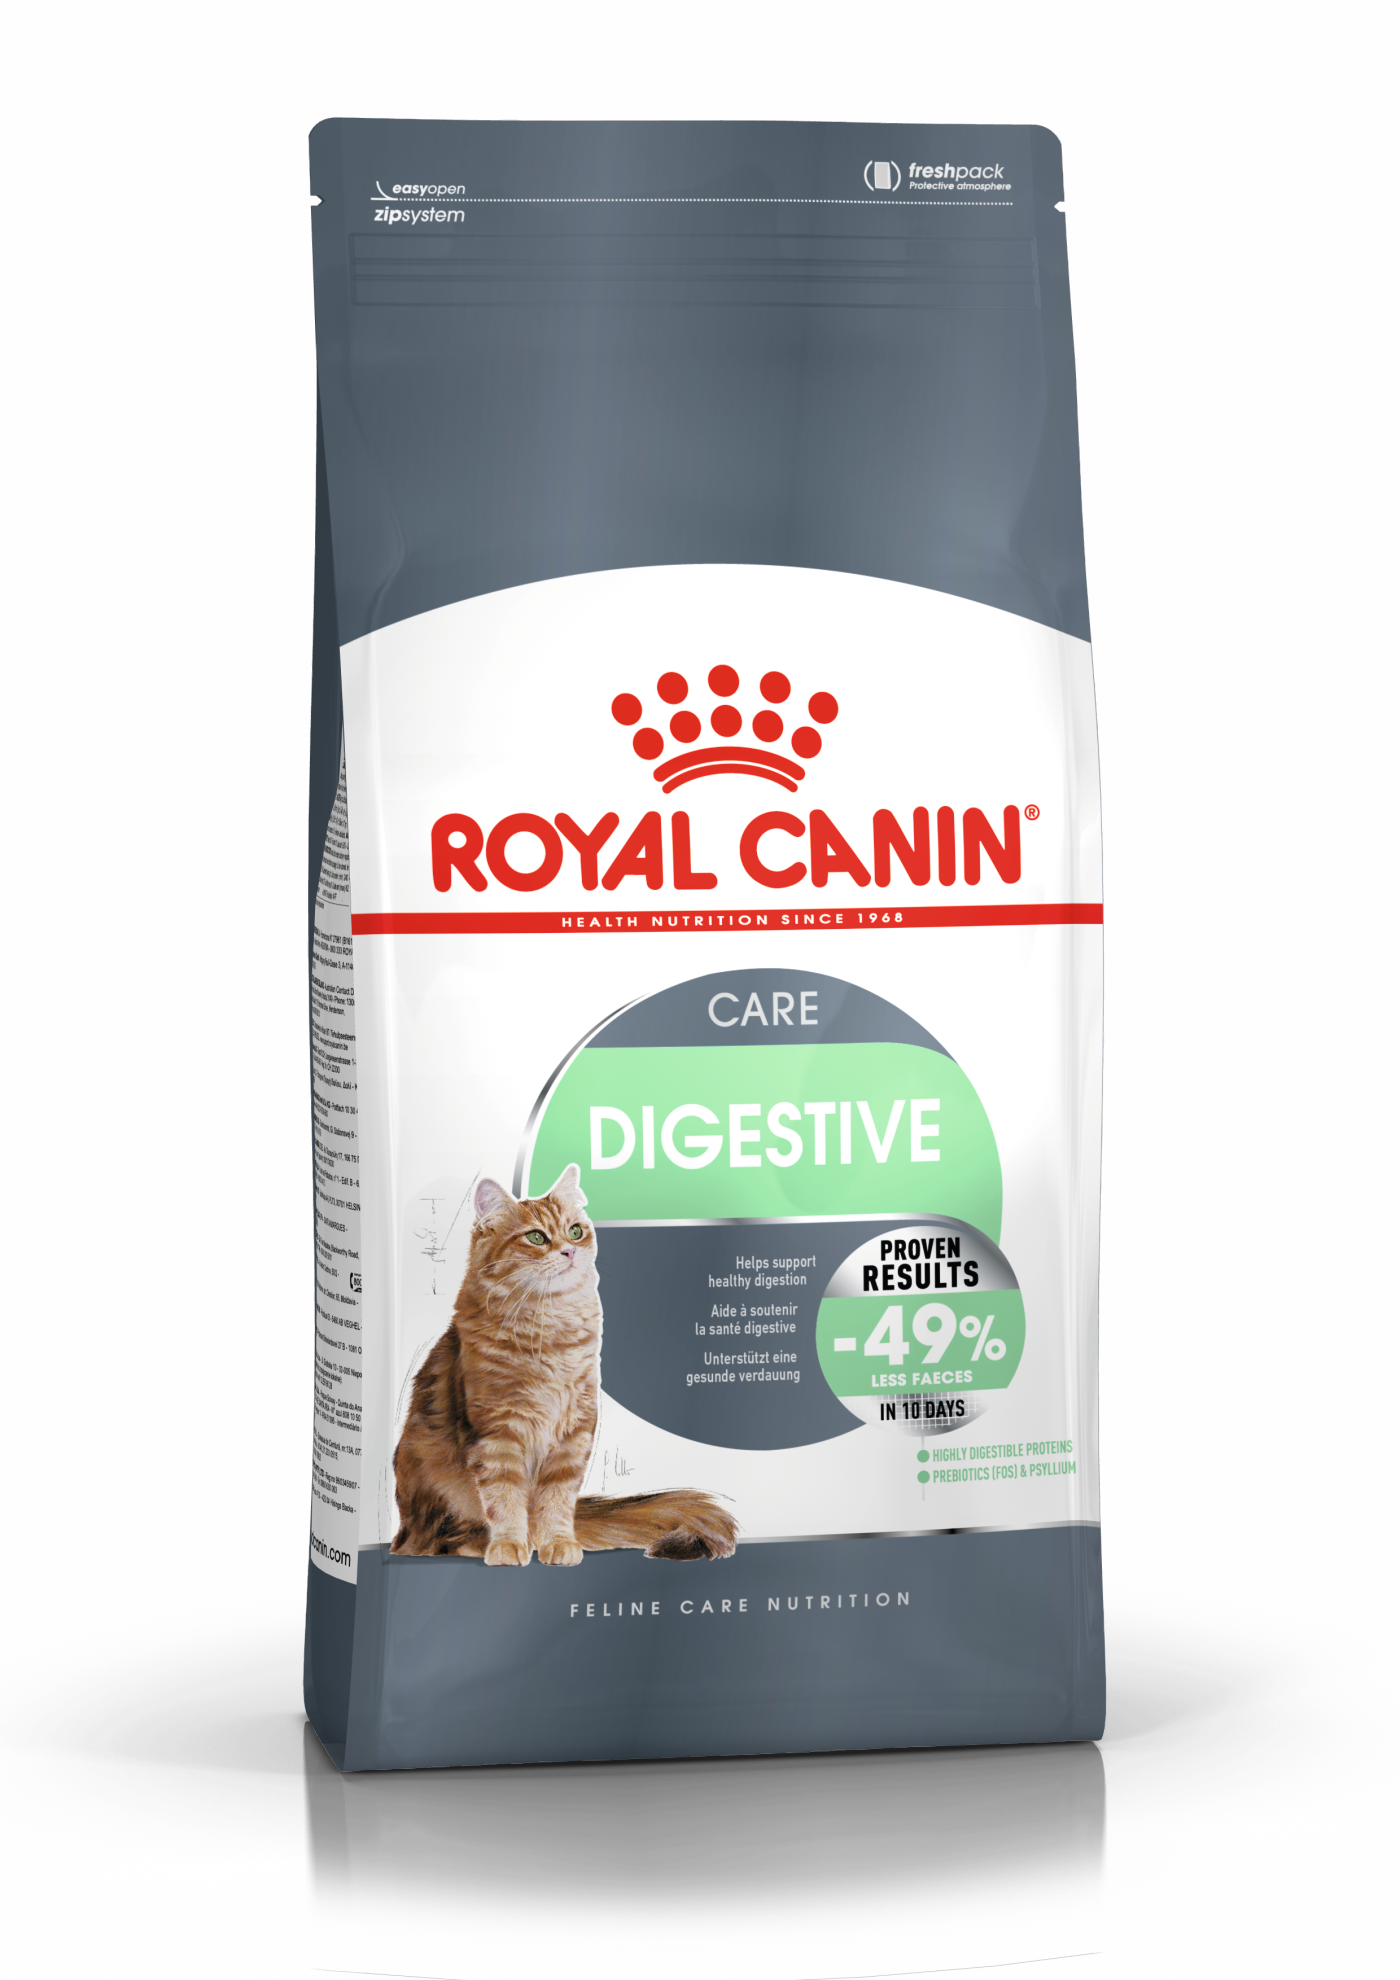 Digestive Care Dry - Royal Canin